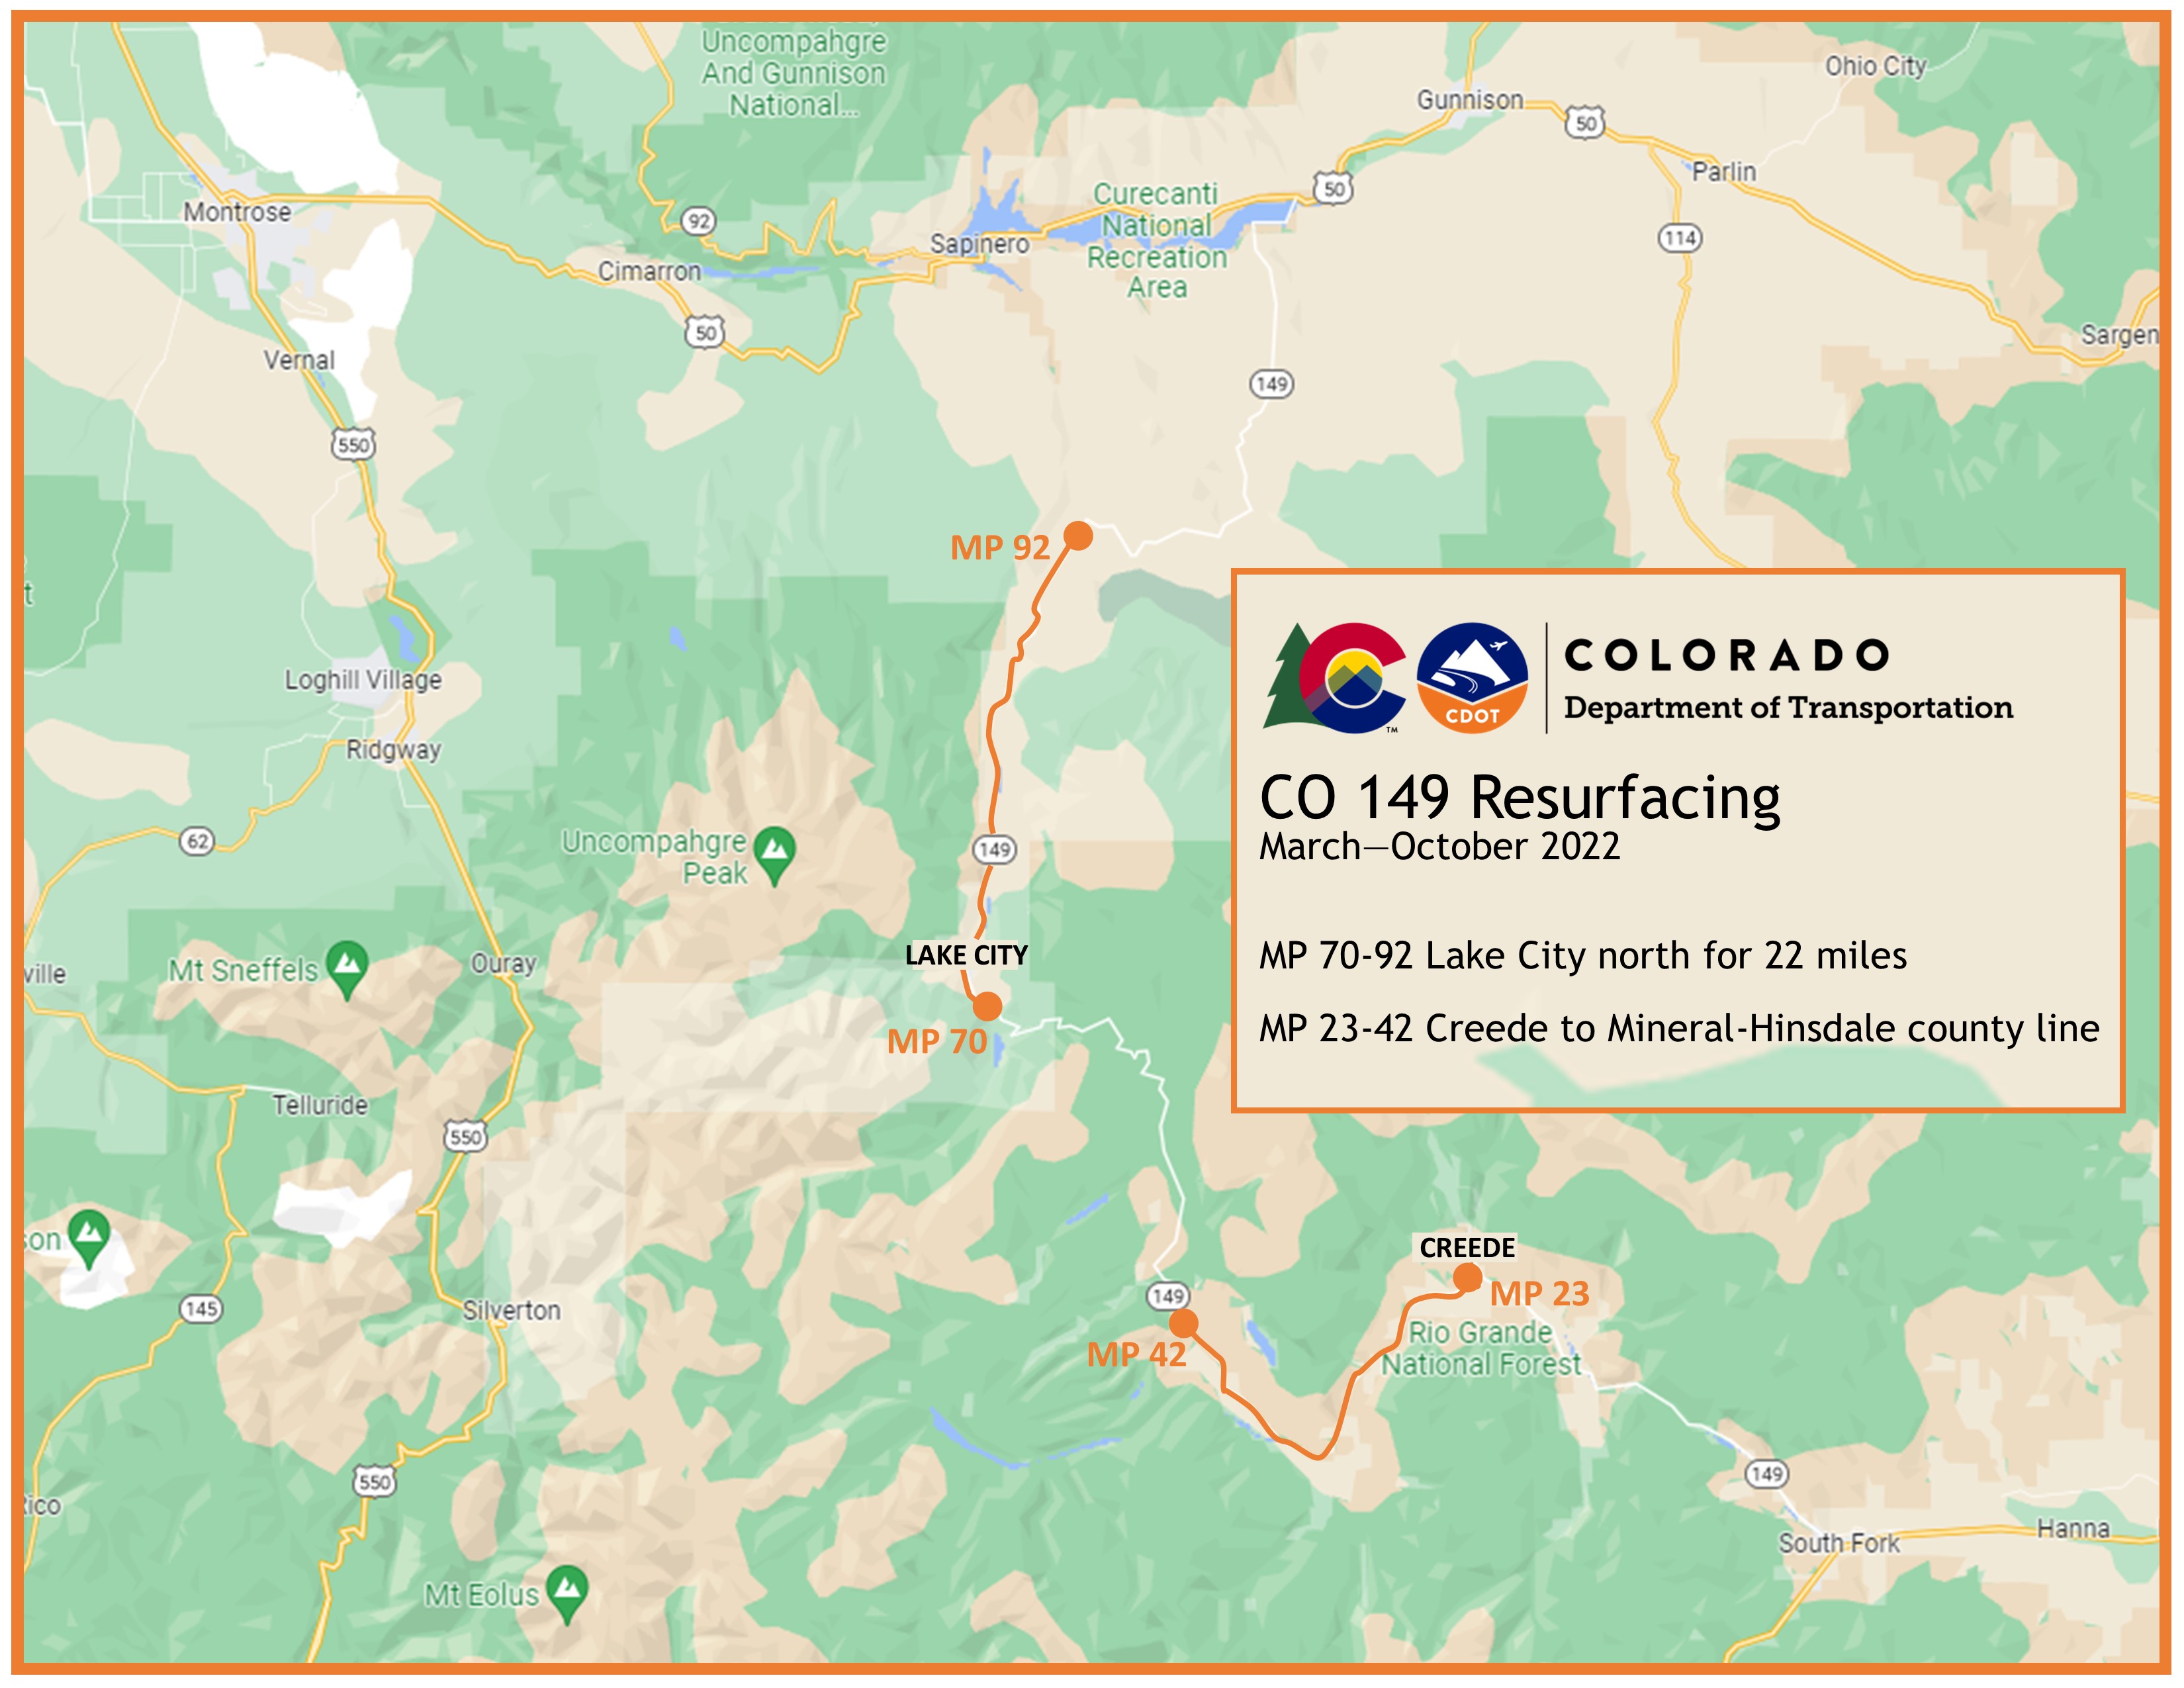 CO 149 MP 23-42 Creede South Map 23490 (1).jpg detail image